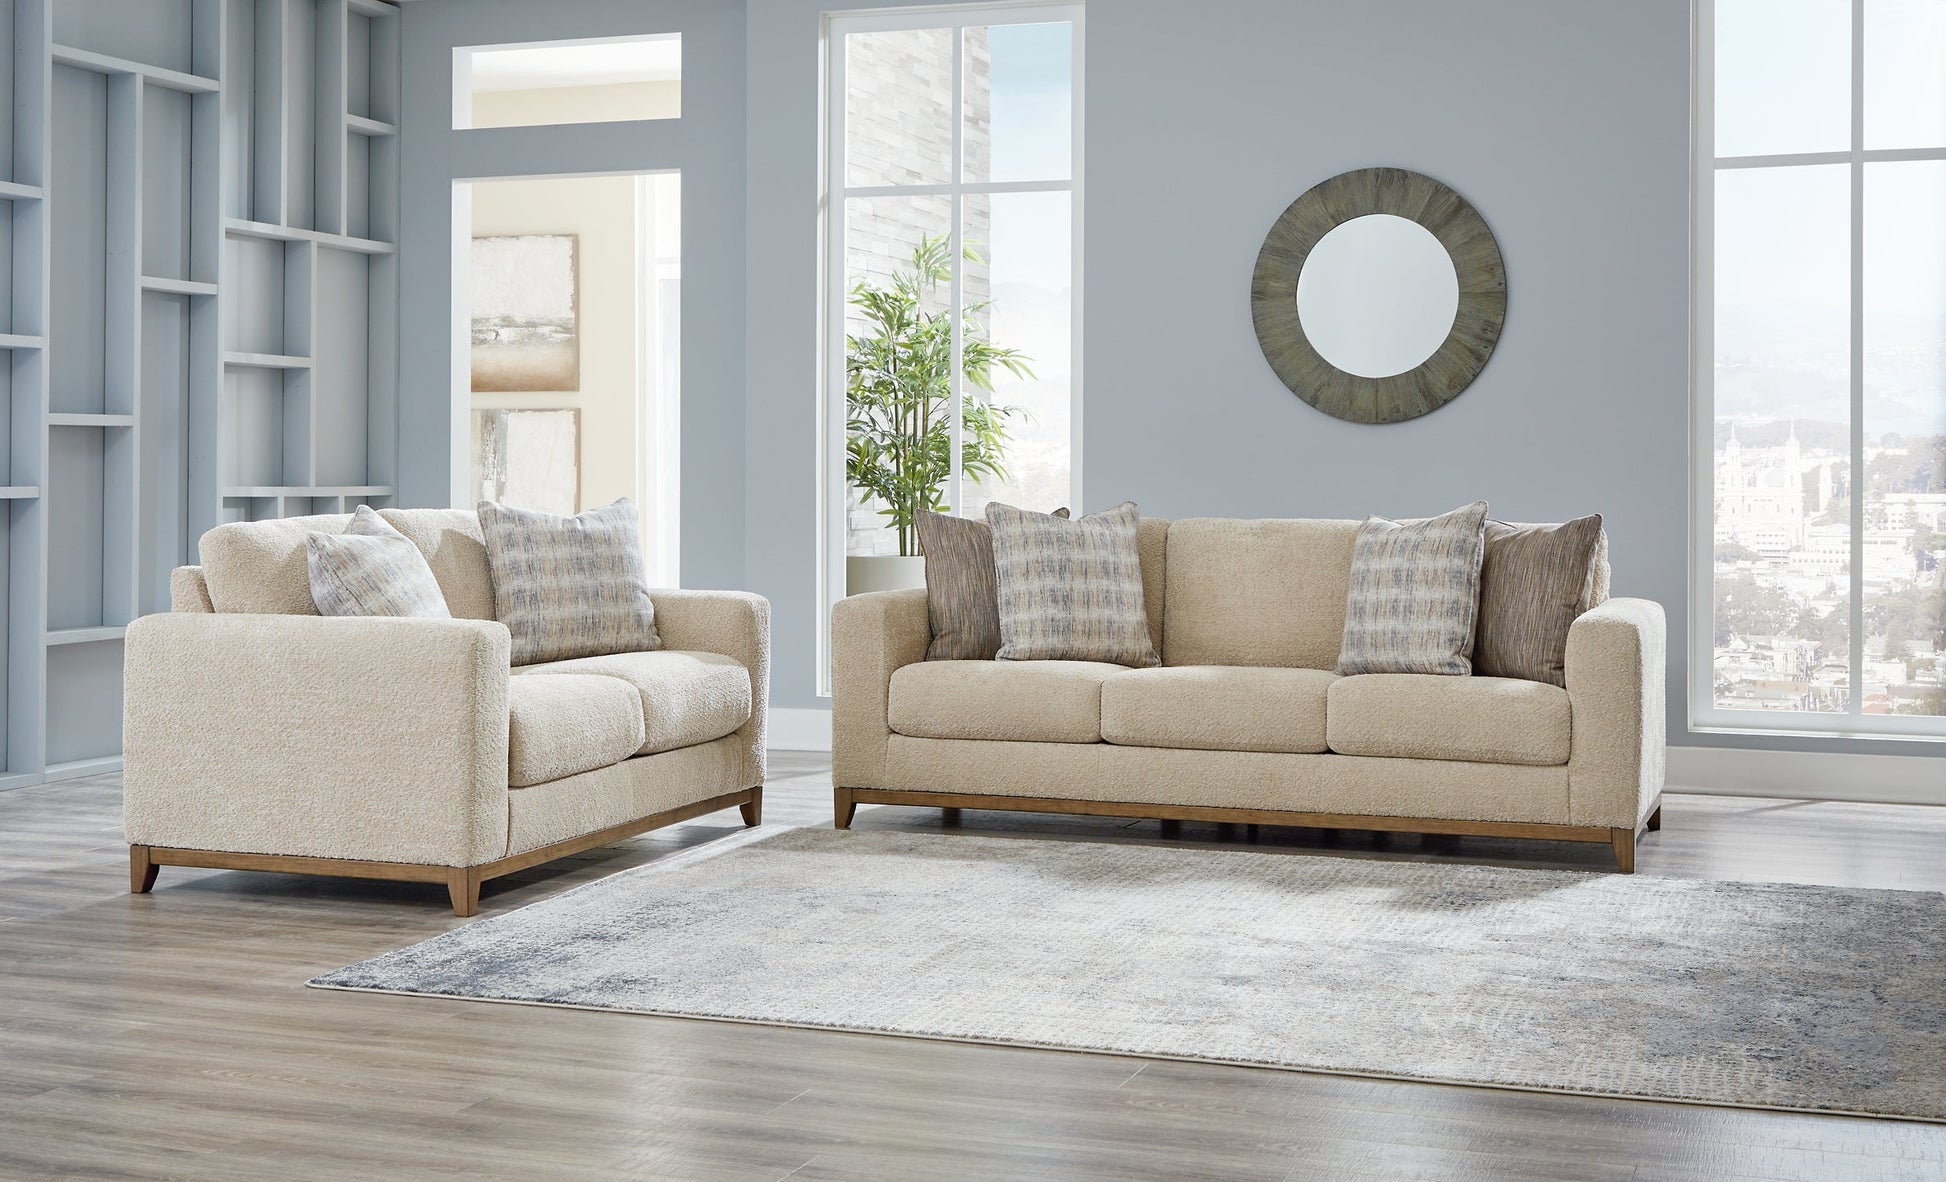 Parklynn Sofa and Loveseat at Walker Mattress and Furniture Locations in Cedar Park and Belton TX.